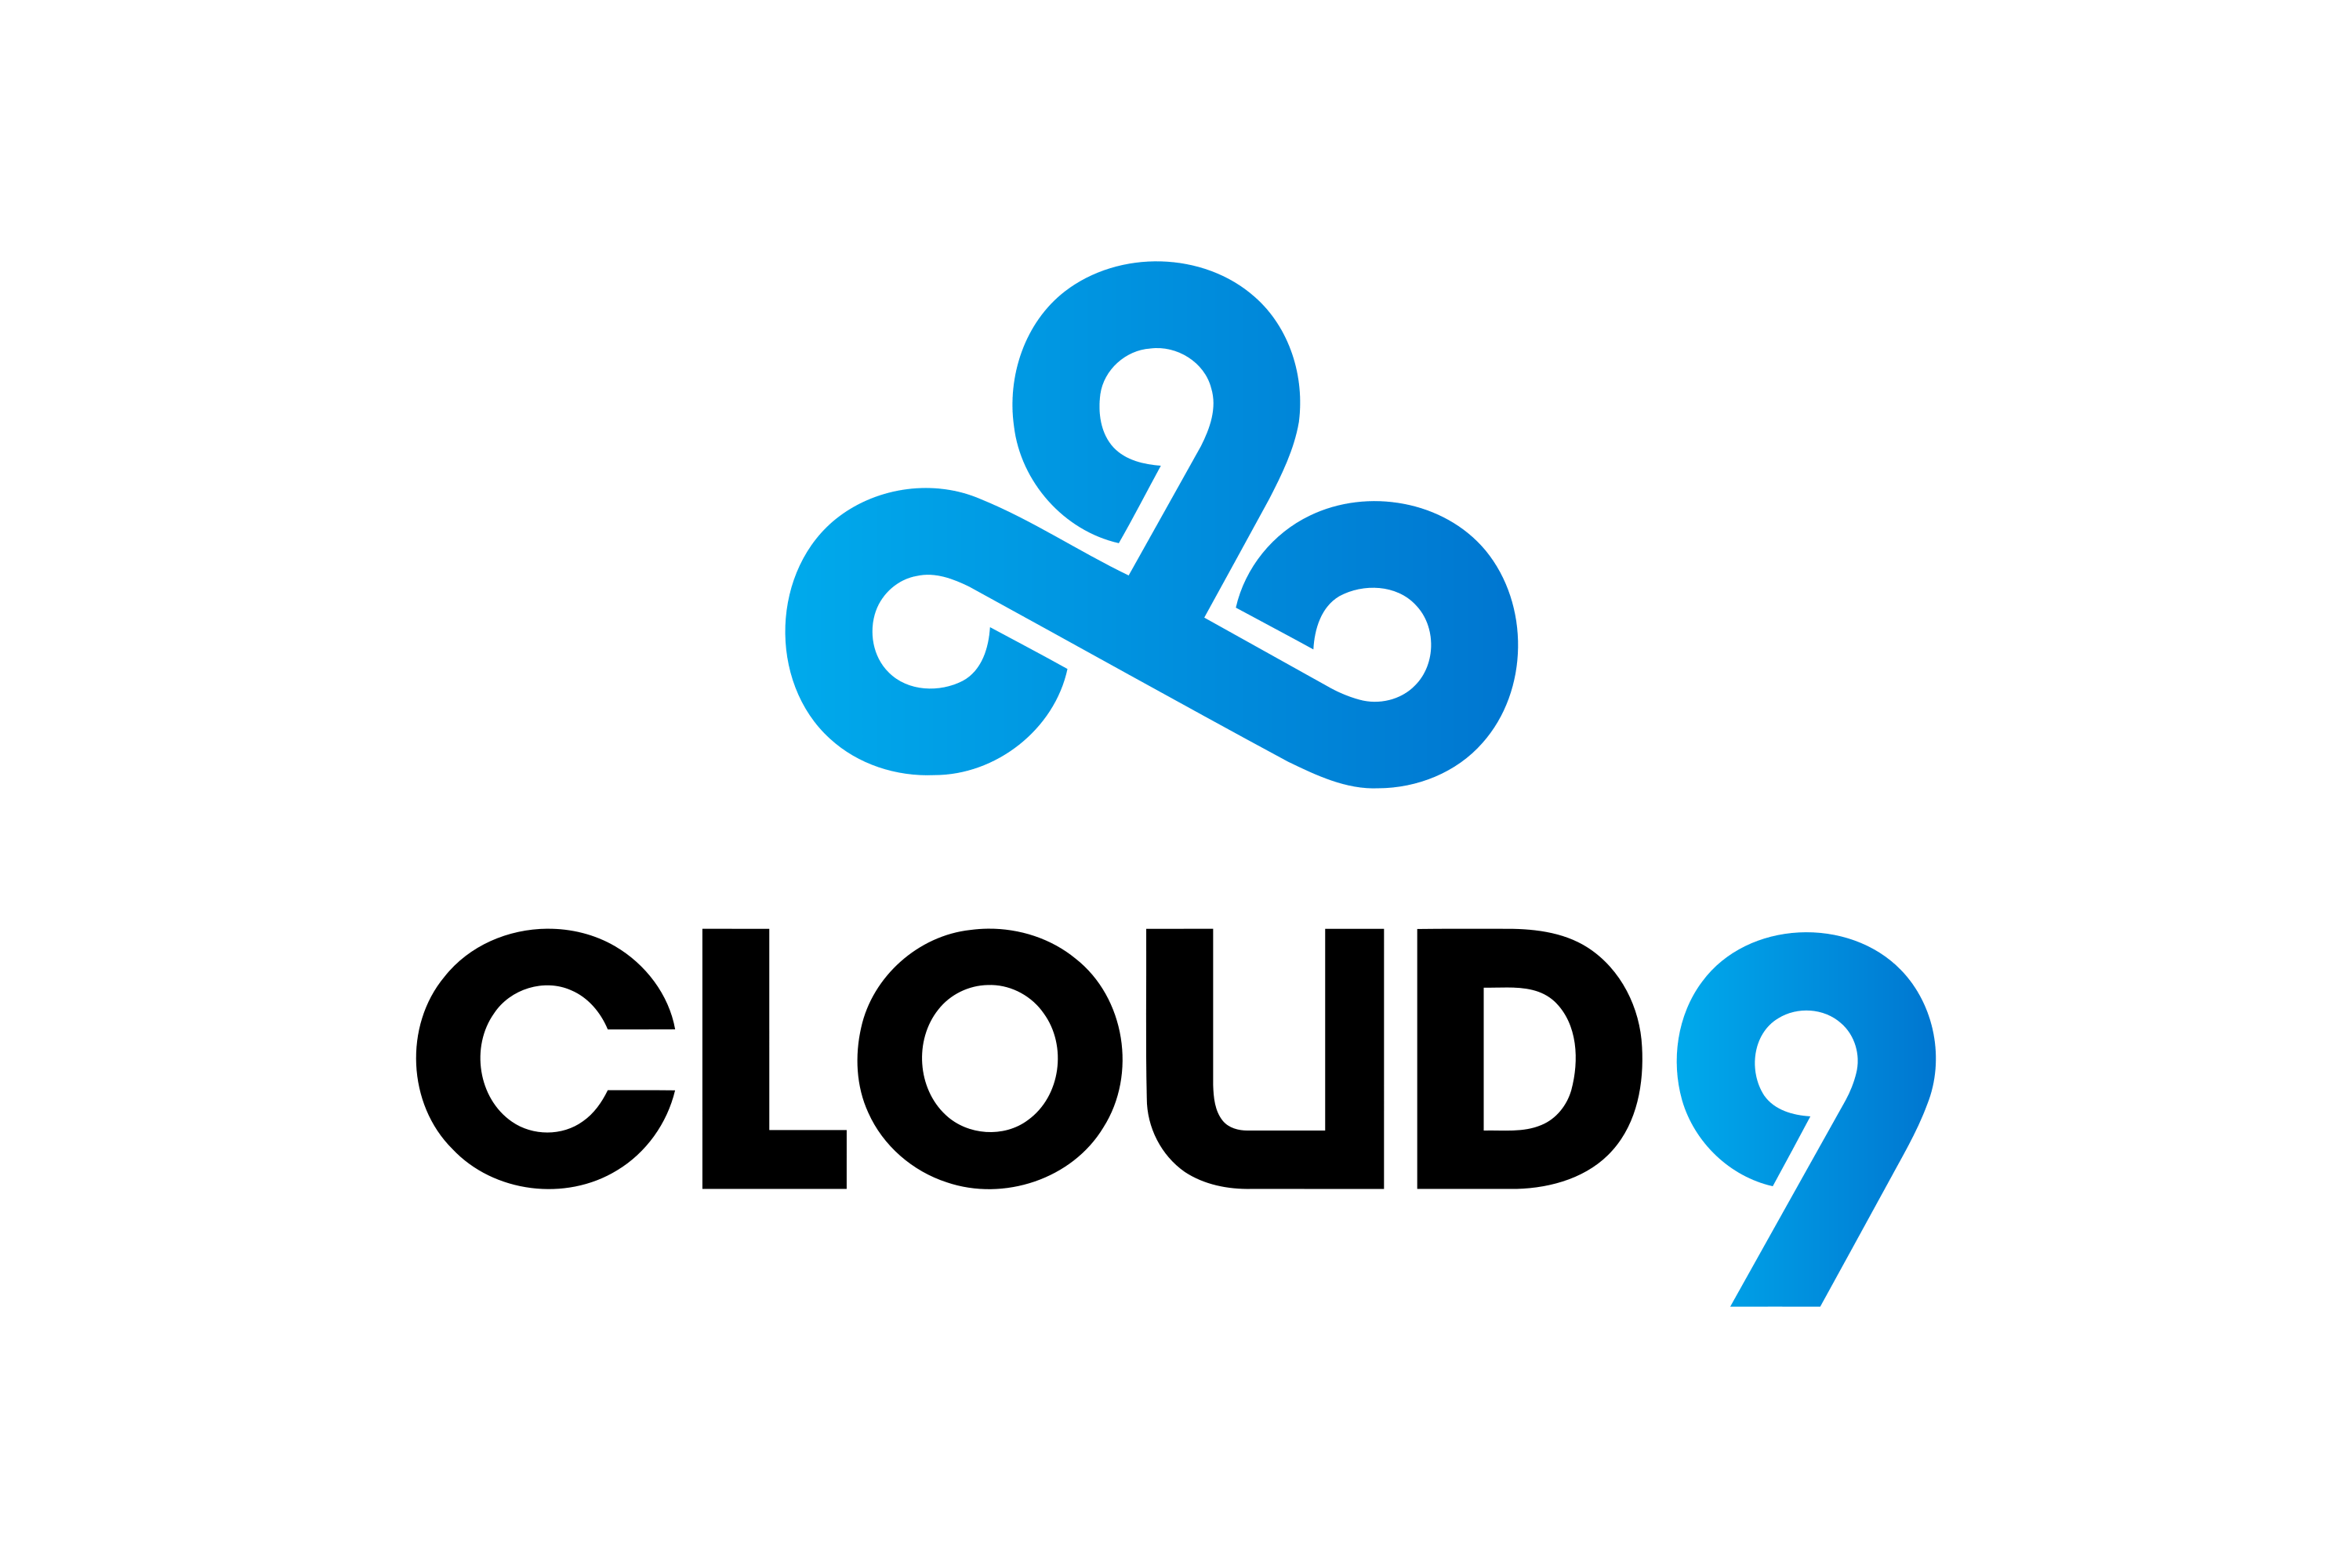 File:Cloud9.png - Wikimedia Commons